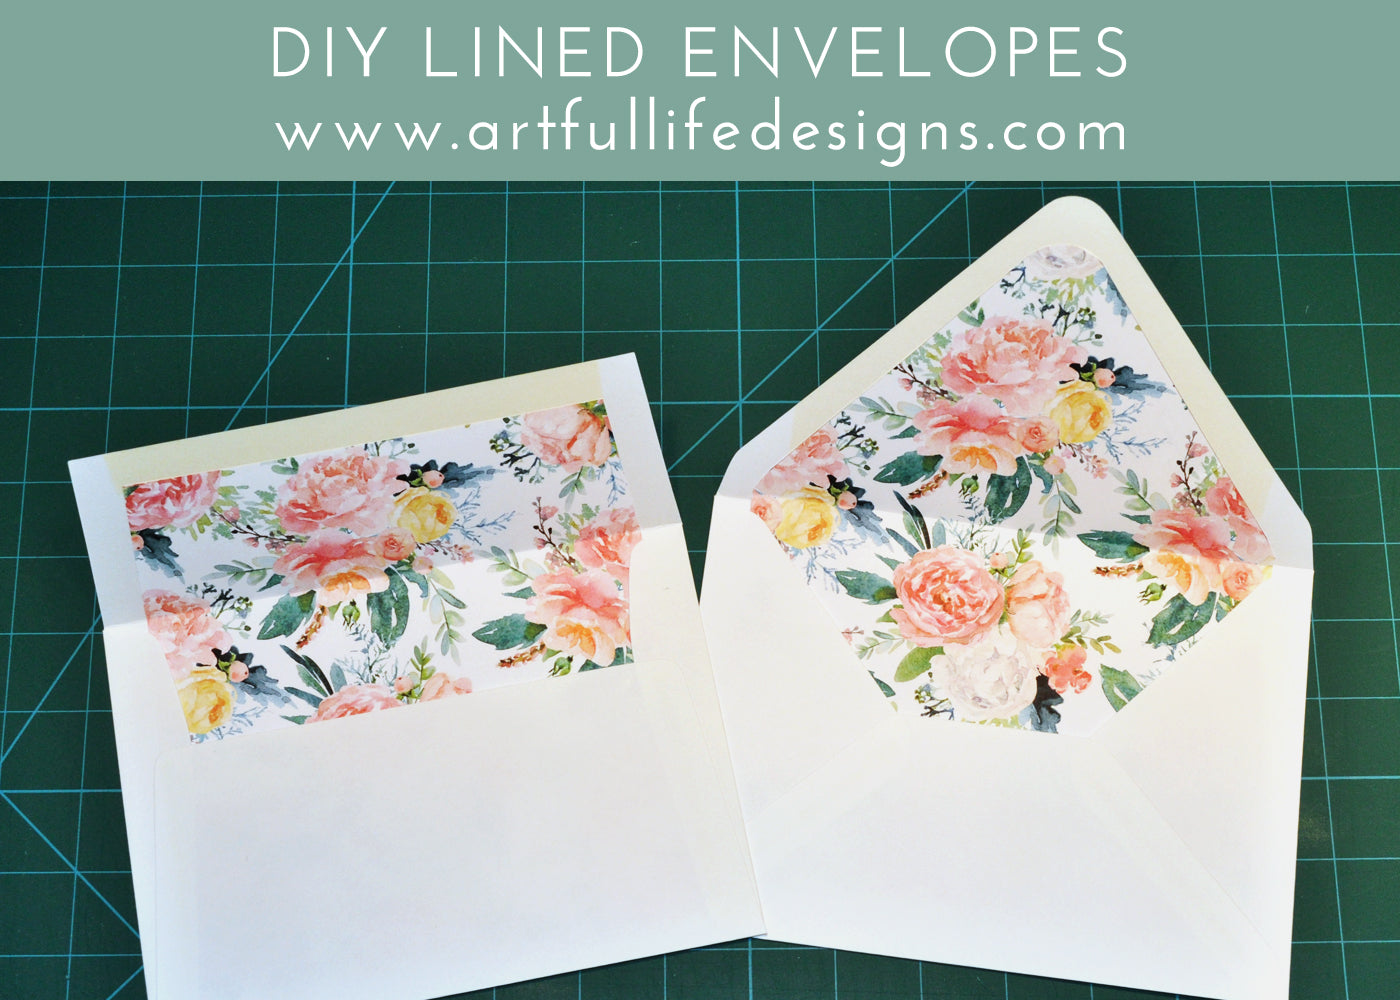 Envelopes with pink floral liners